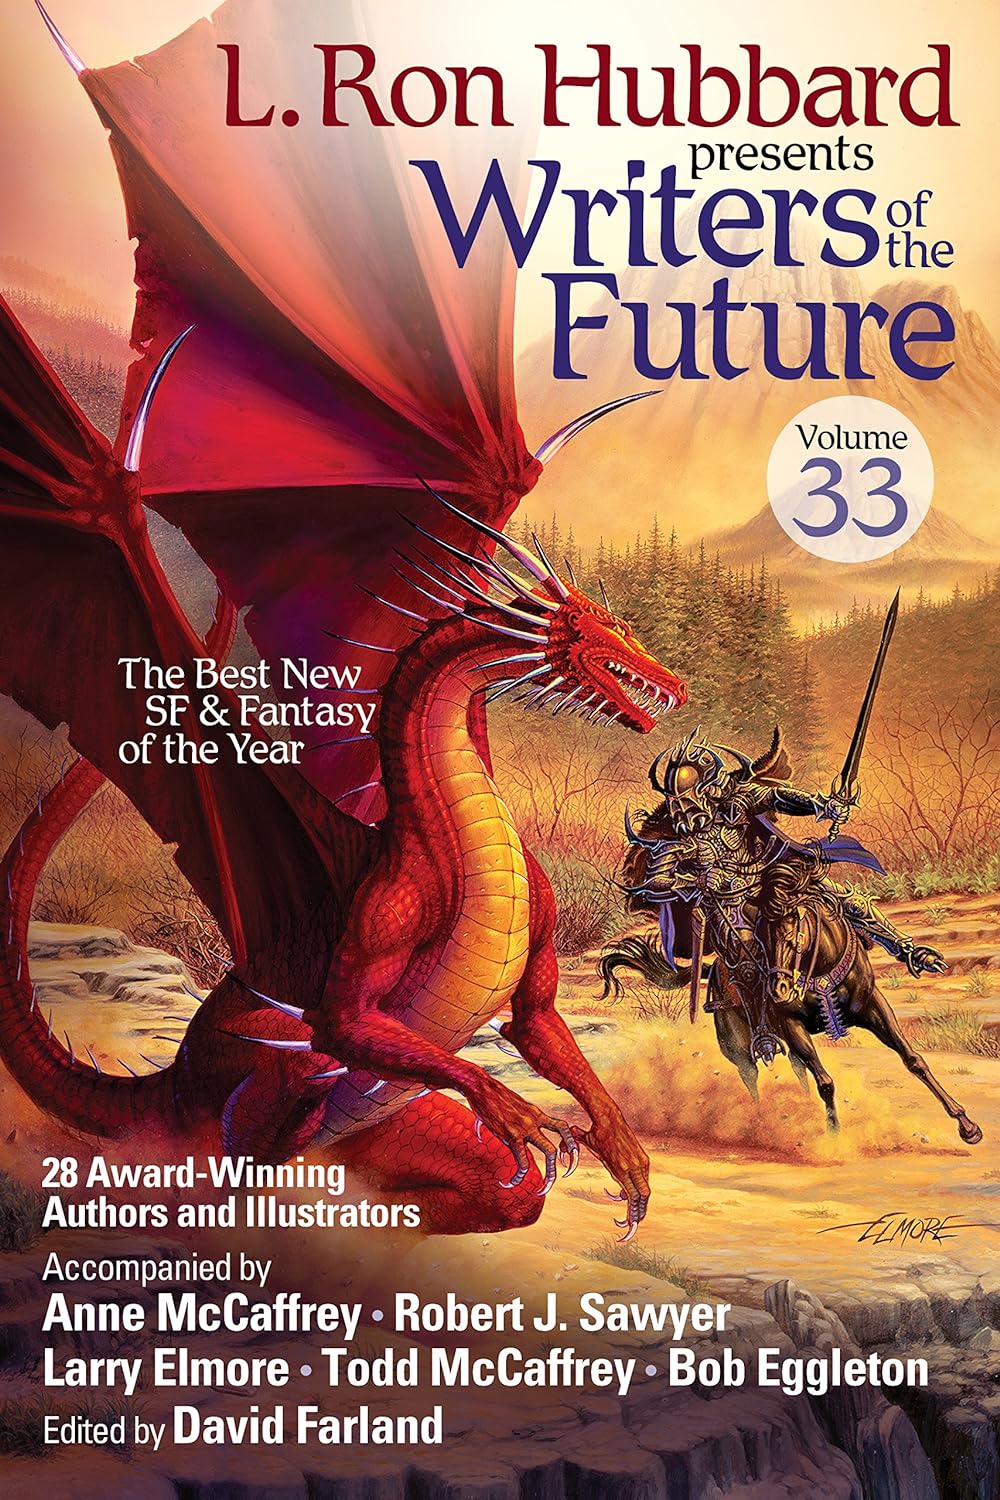 L. Ron Hubbard Presents Writers of the Future Volume 33: Award-Winning Sci-Fi & Fantasy Short Stories of the Year $1.99